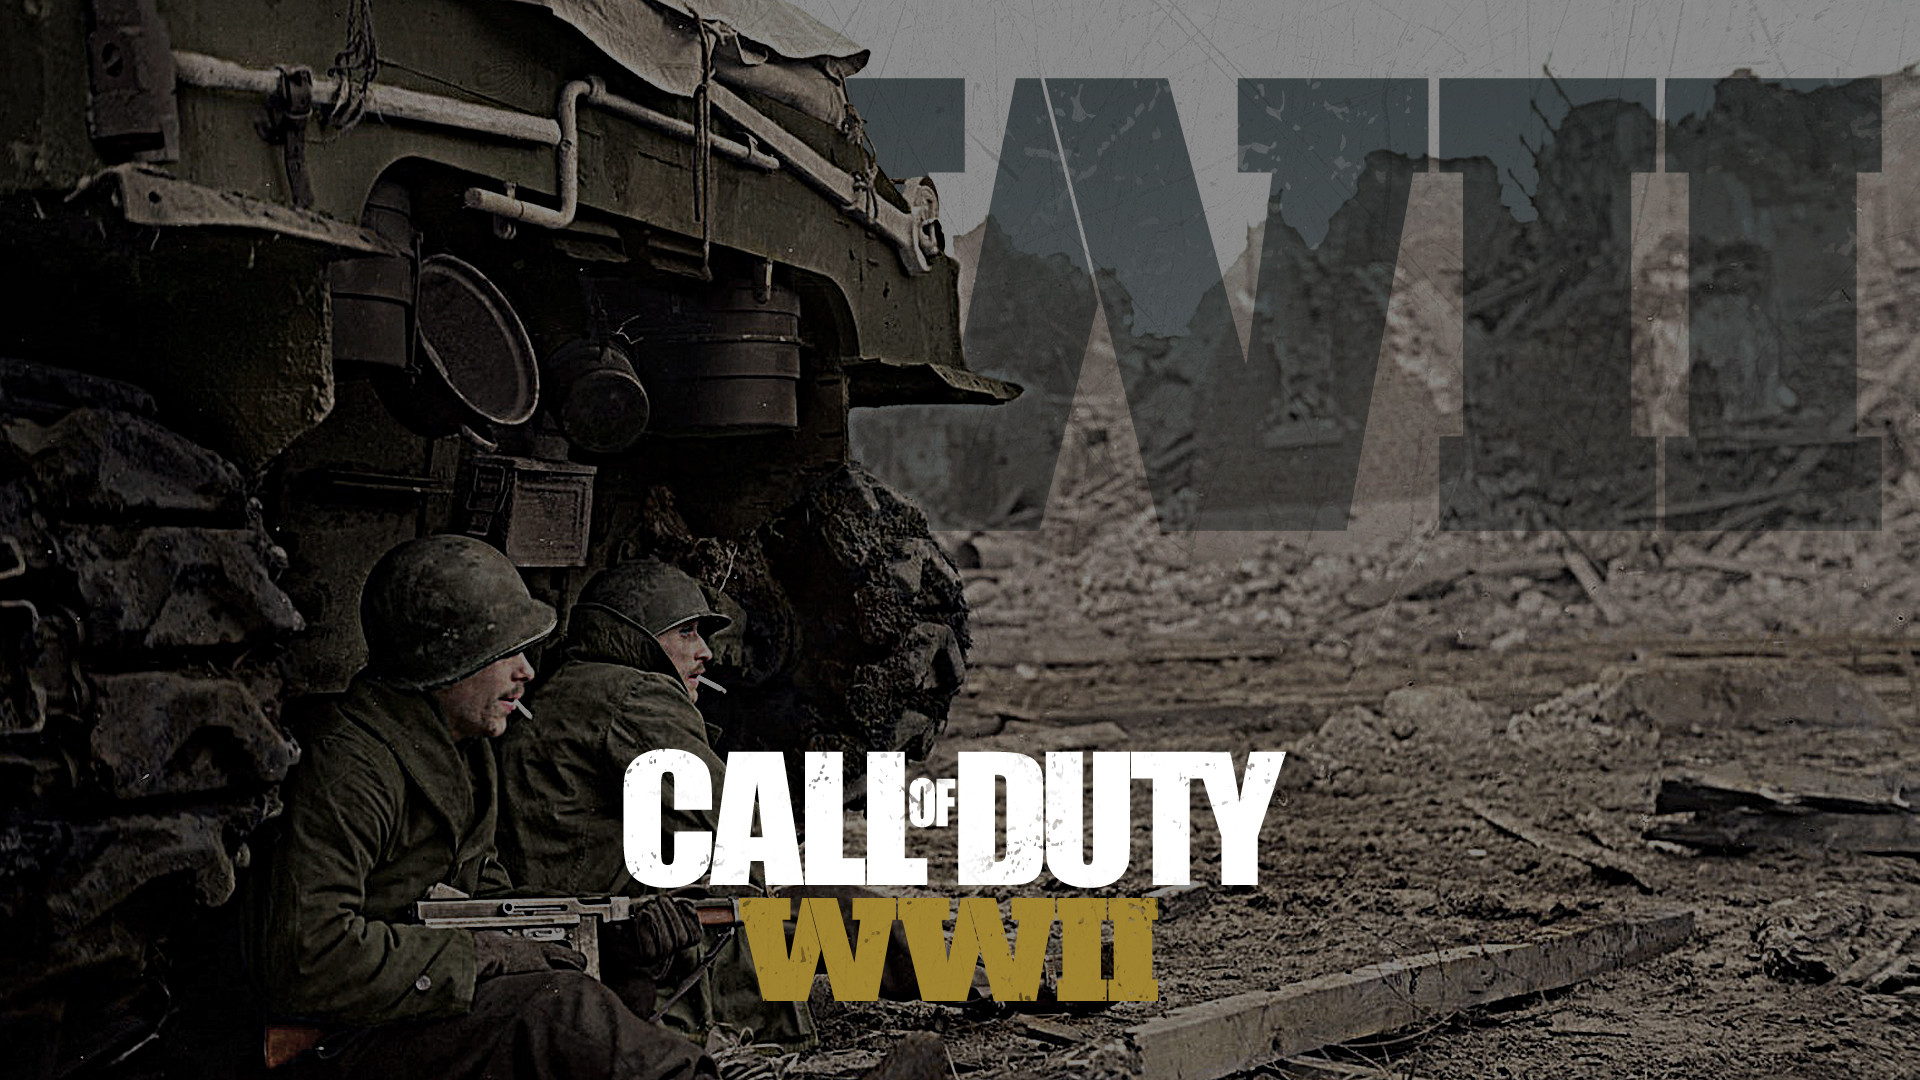 1920x1080, Call Of Duty Wwii Game Background Photos - Call Of Duty Ww2 Wallpaper 1080p - 1920x1080 Wallpaper - teahub.io